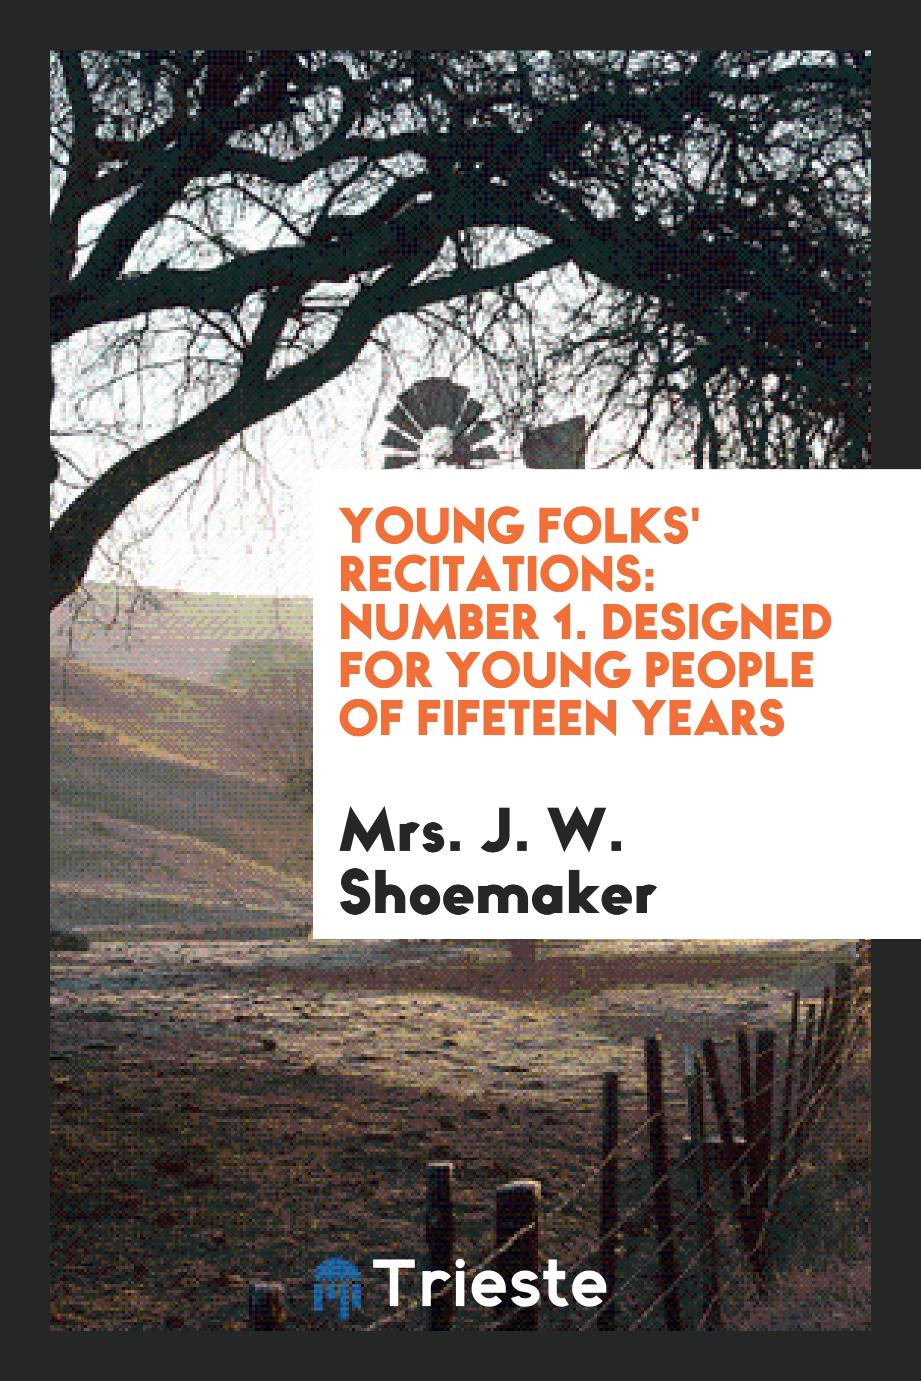 Young Folks' Recitations: Number 1. Designed for Young People of Fifeteen Years